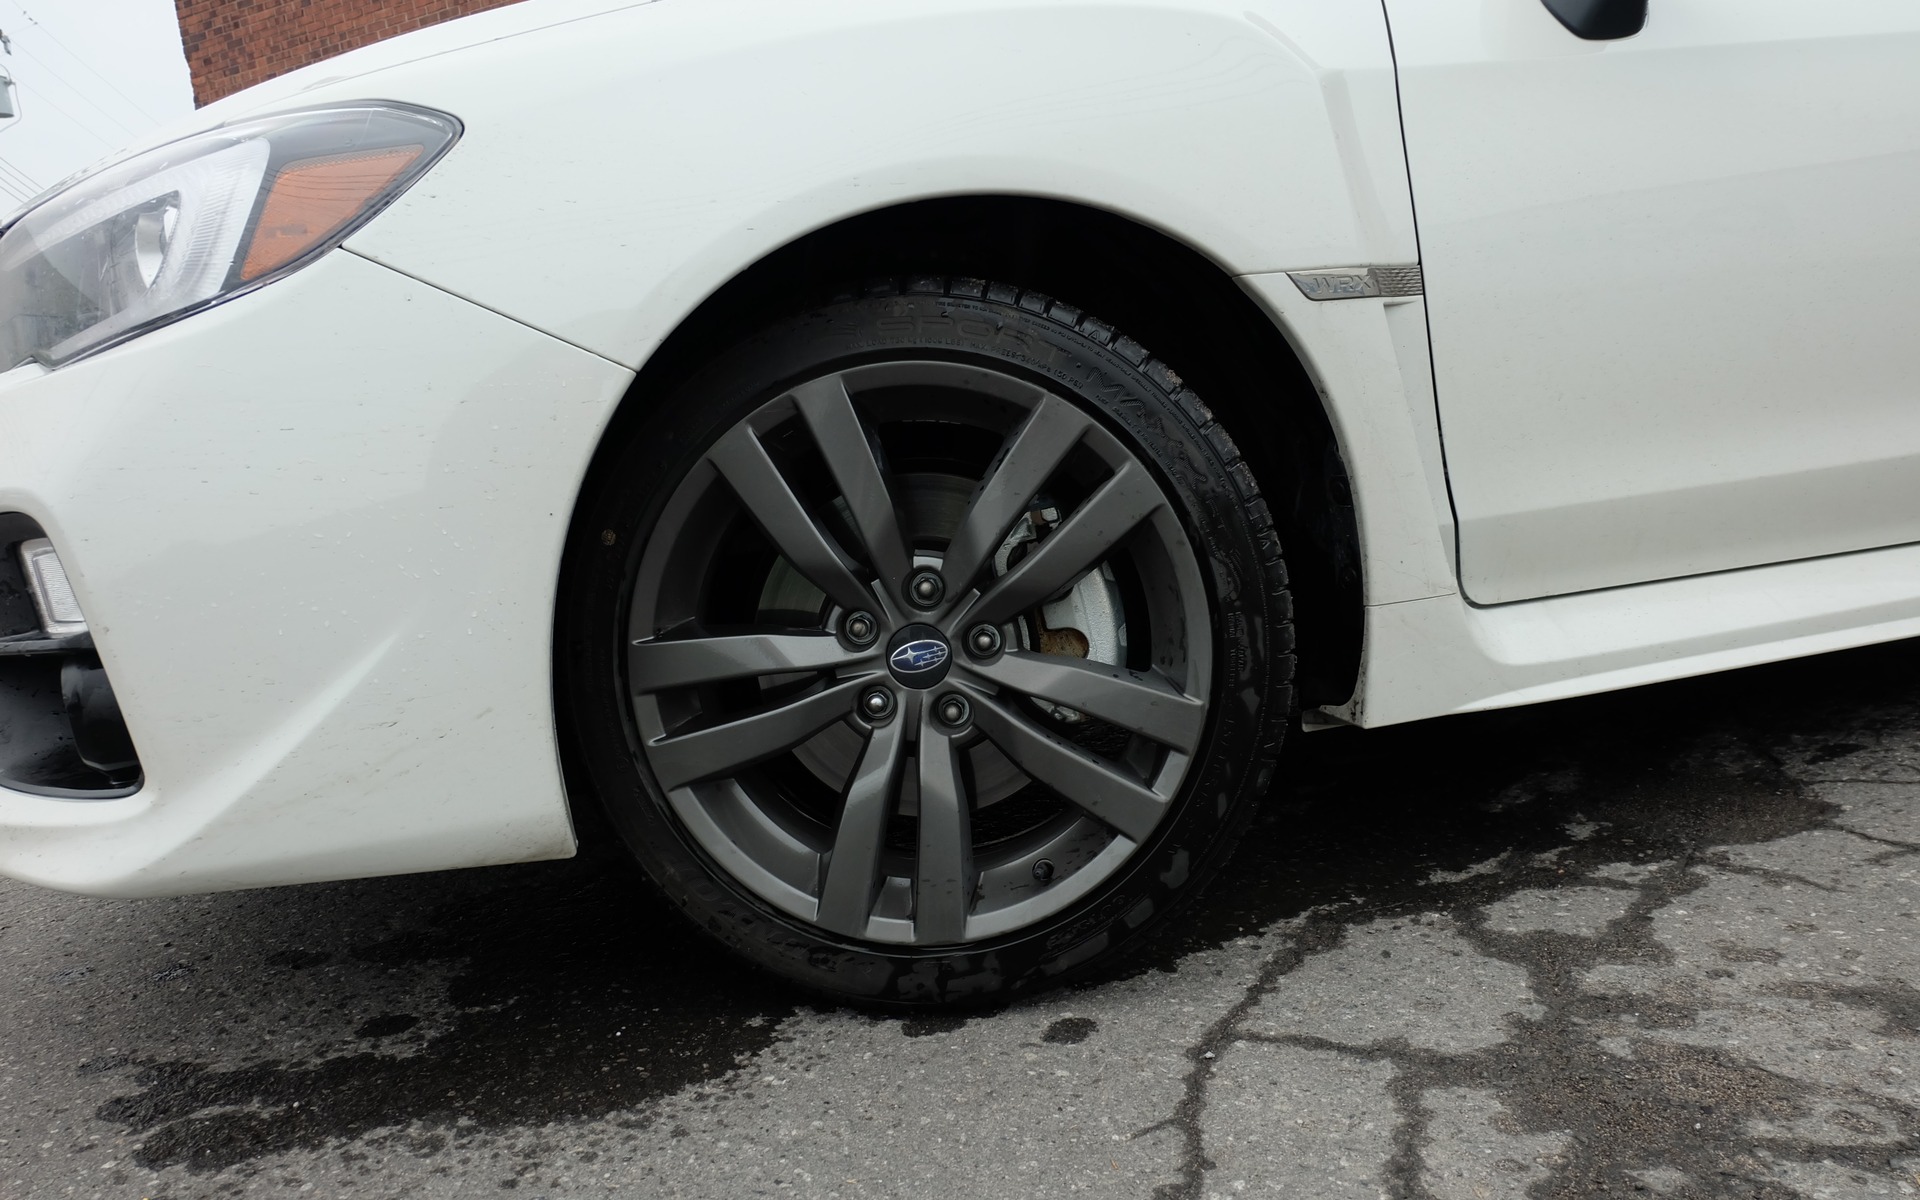 The 18-inch wheels come standard.